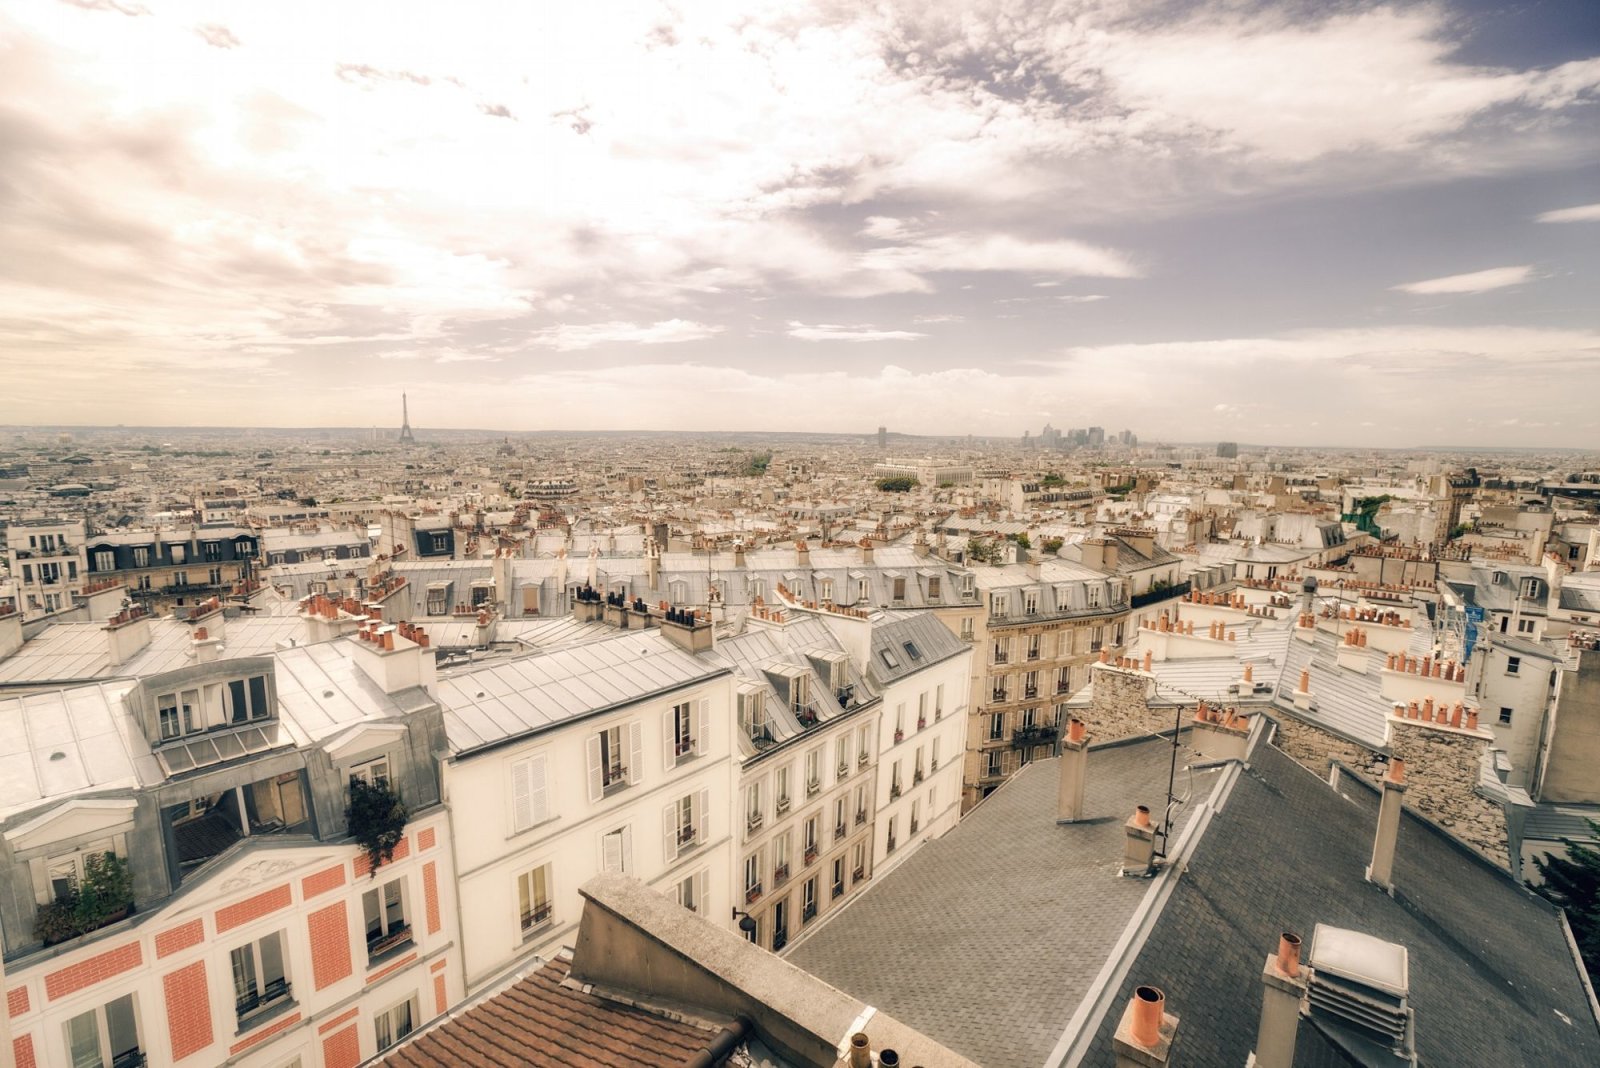 Paris Rooftops and Eiffel Tower - Above Montmartre